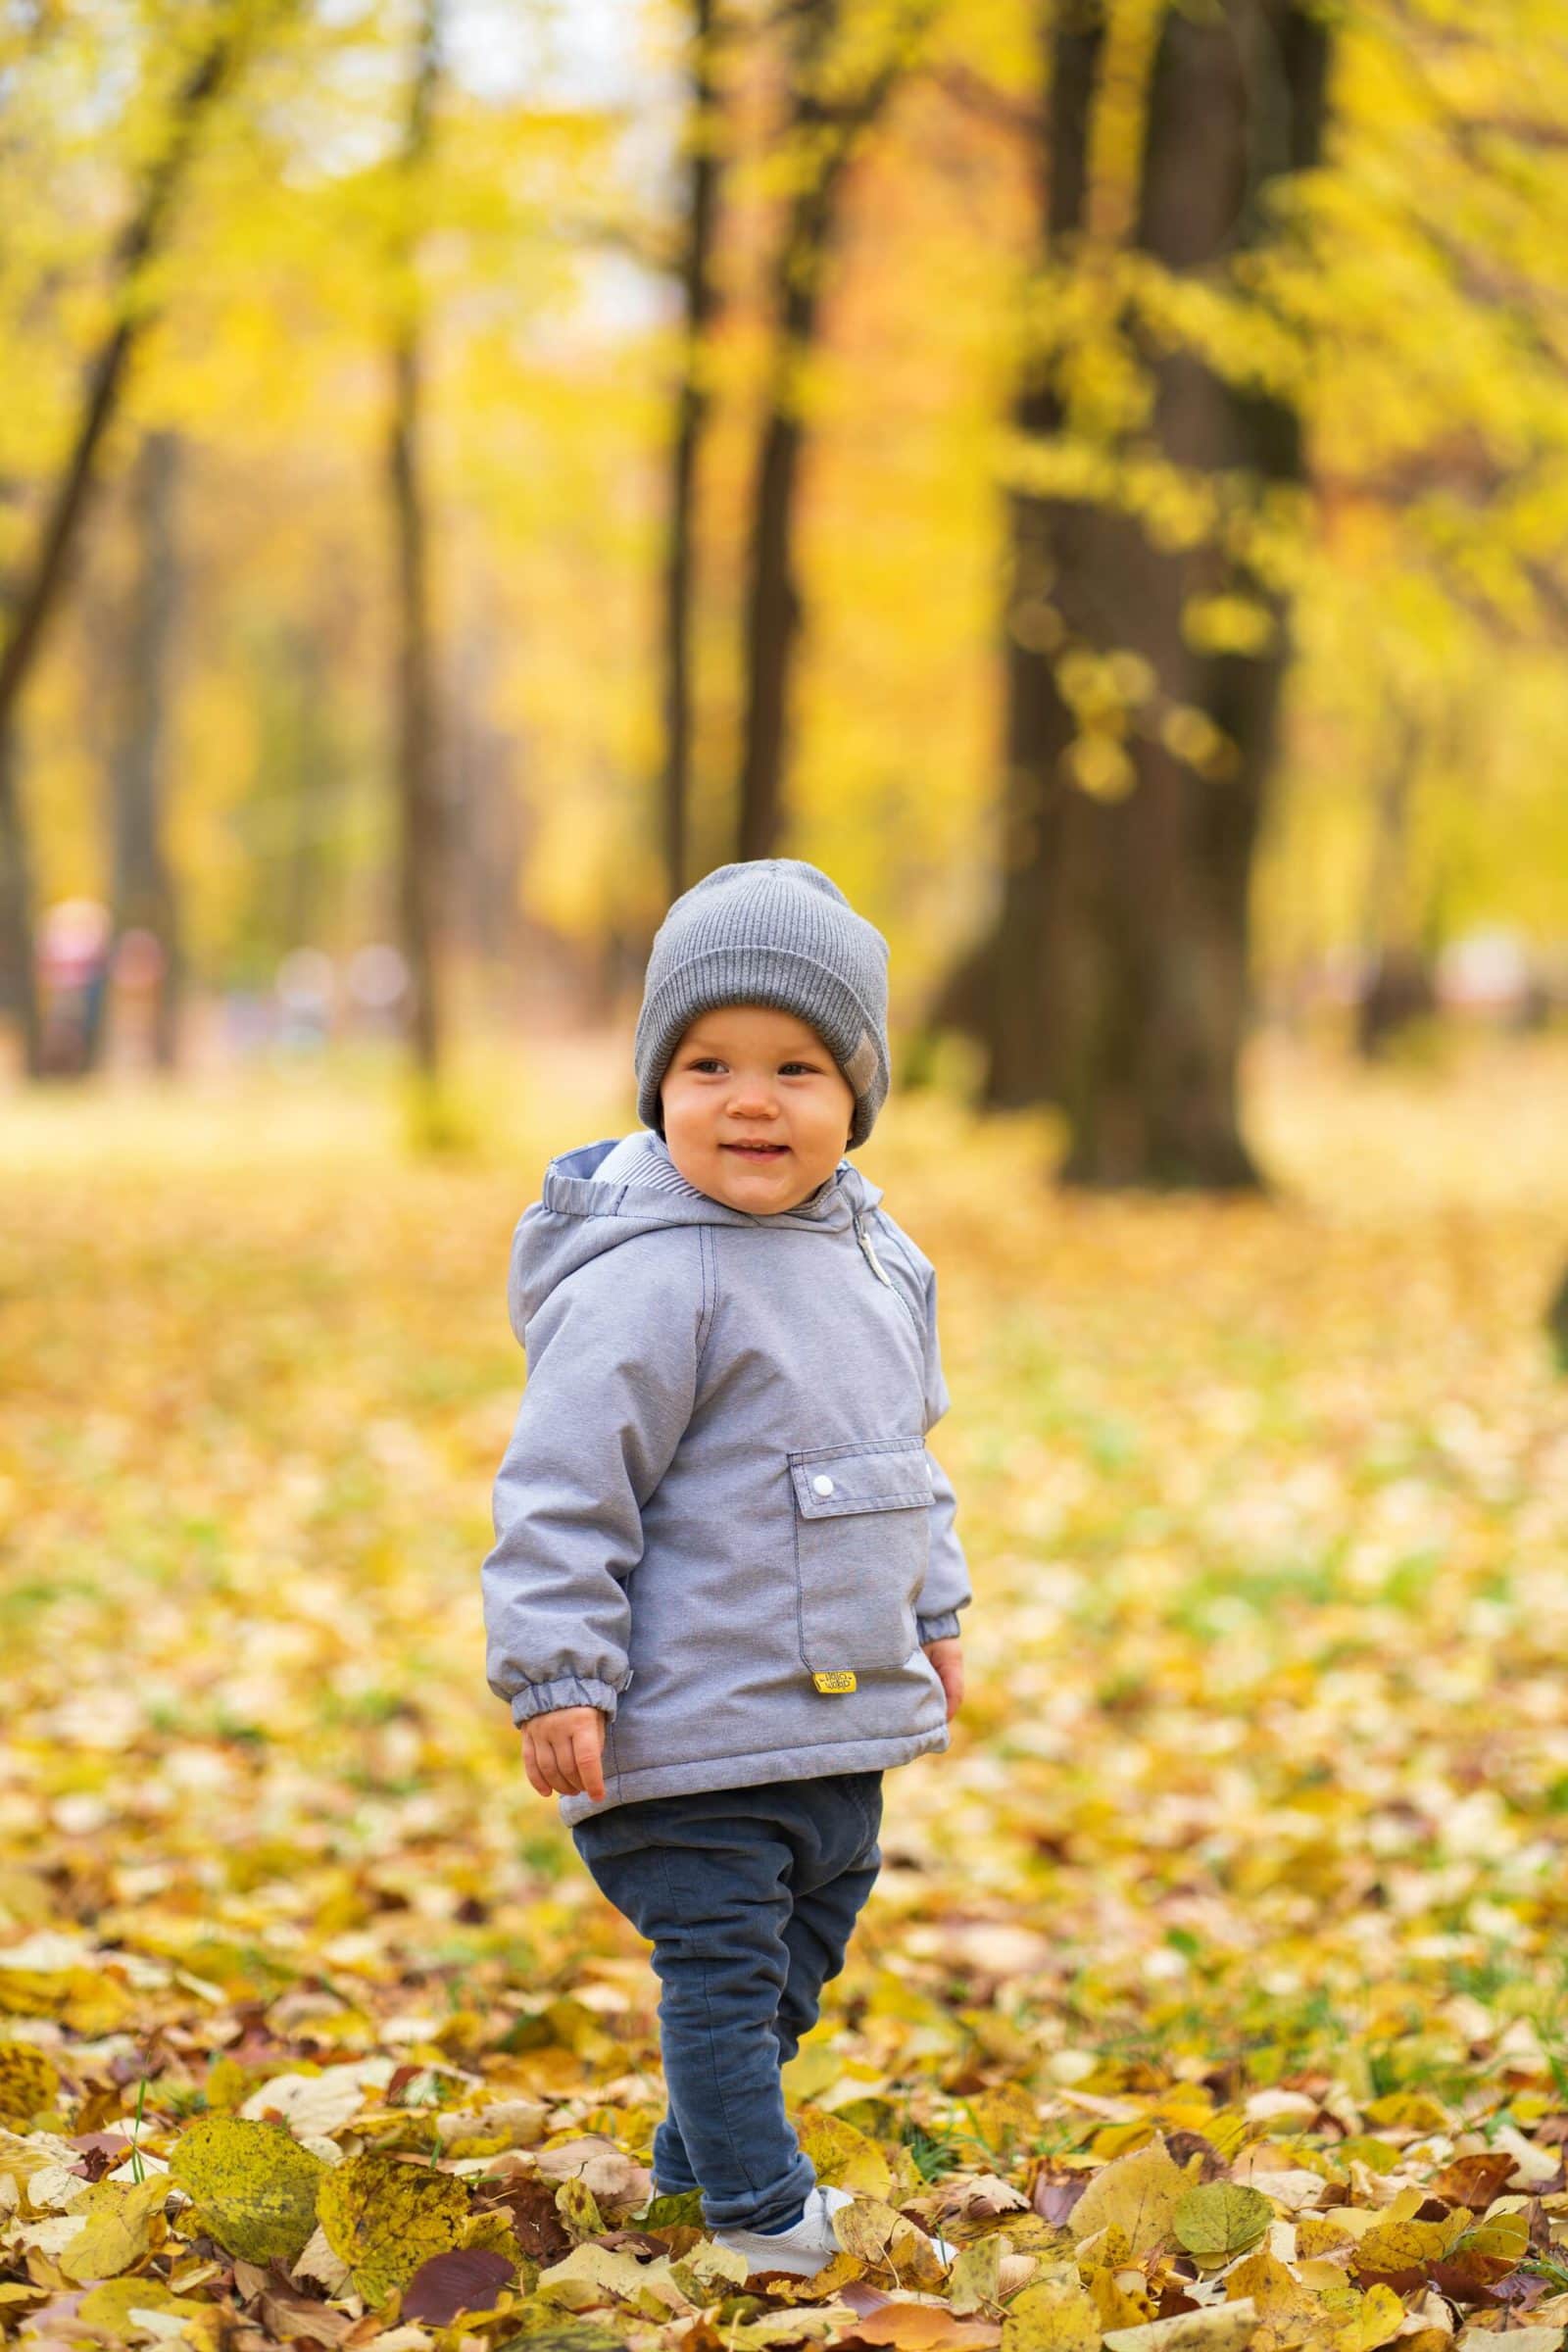 Little boy standing in the forest with yellow leaves